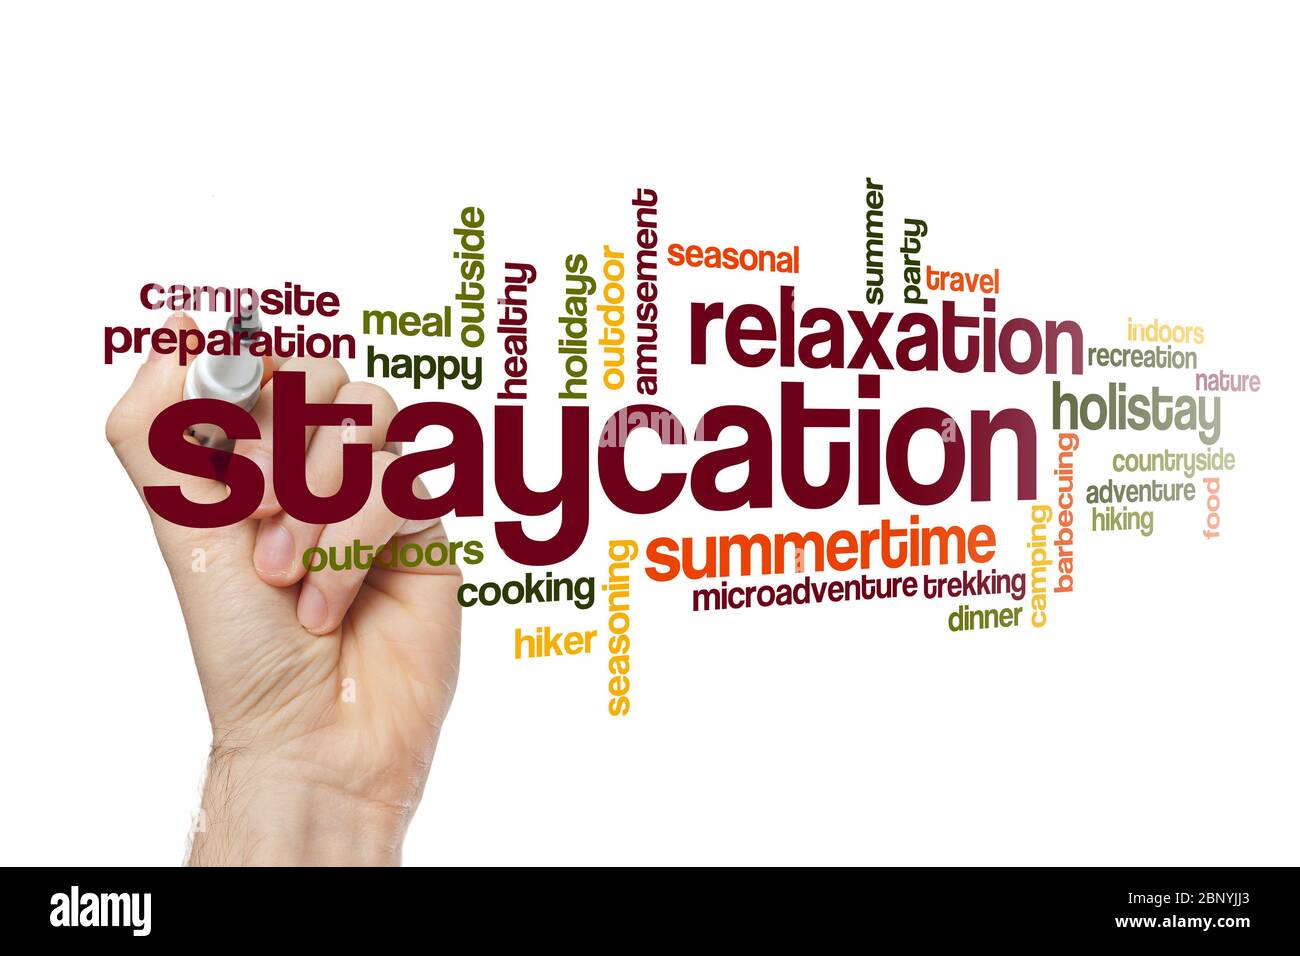 Staycation word cloud concept on white background Stock Photo